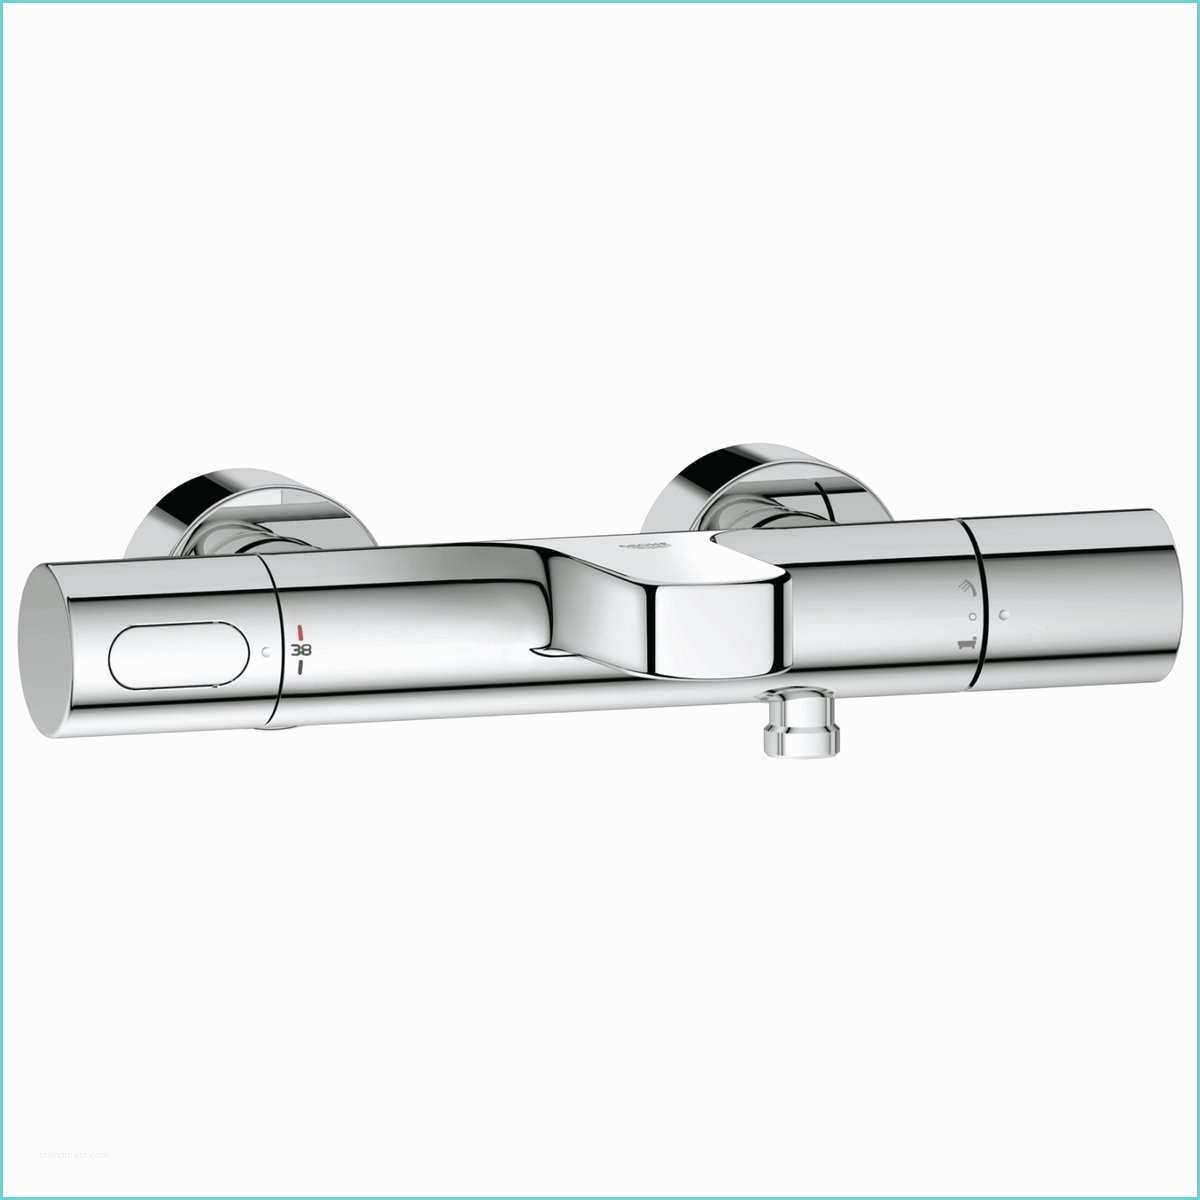 Grohe Grohtherm 3000 Grohe Grohtherm 3000 Cosmopolitan Badthermostaat Met